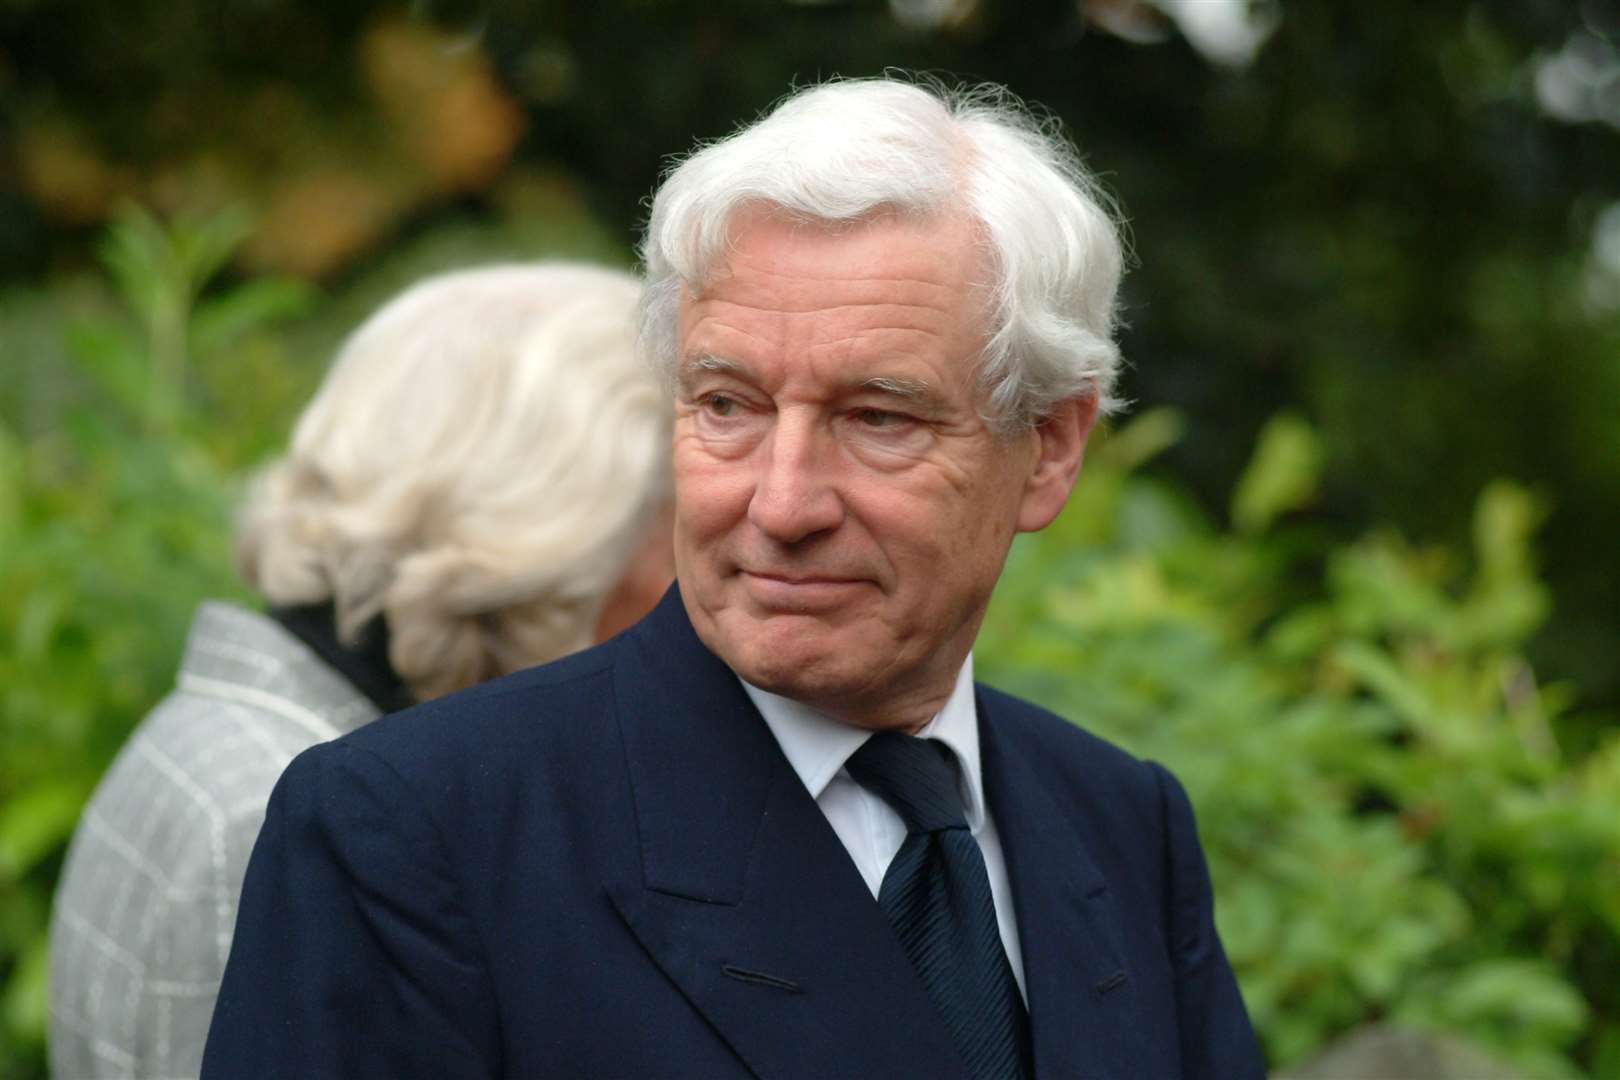 Lord Crathorne - a regular visitor to Newhouse - at the funeral in Mersham of Lord Brabourne in 2005